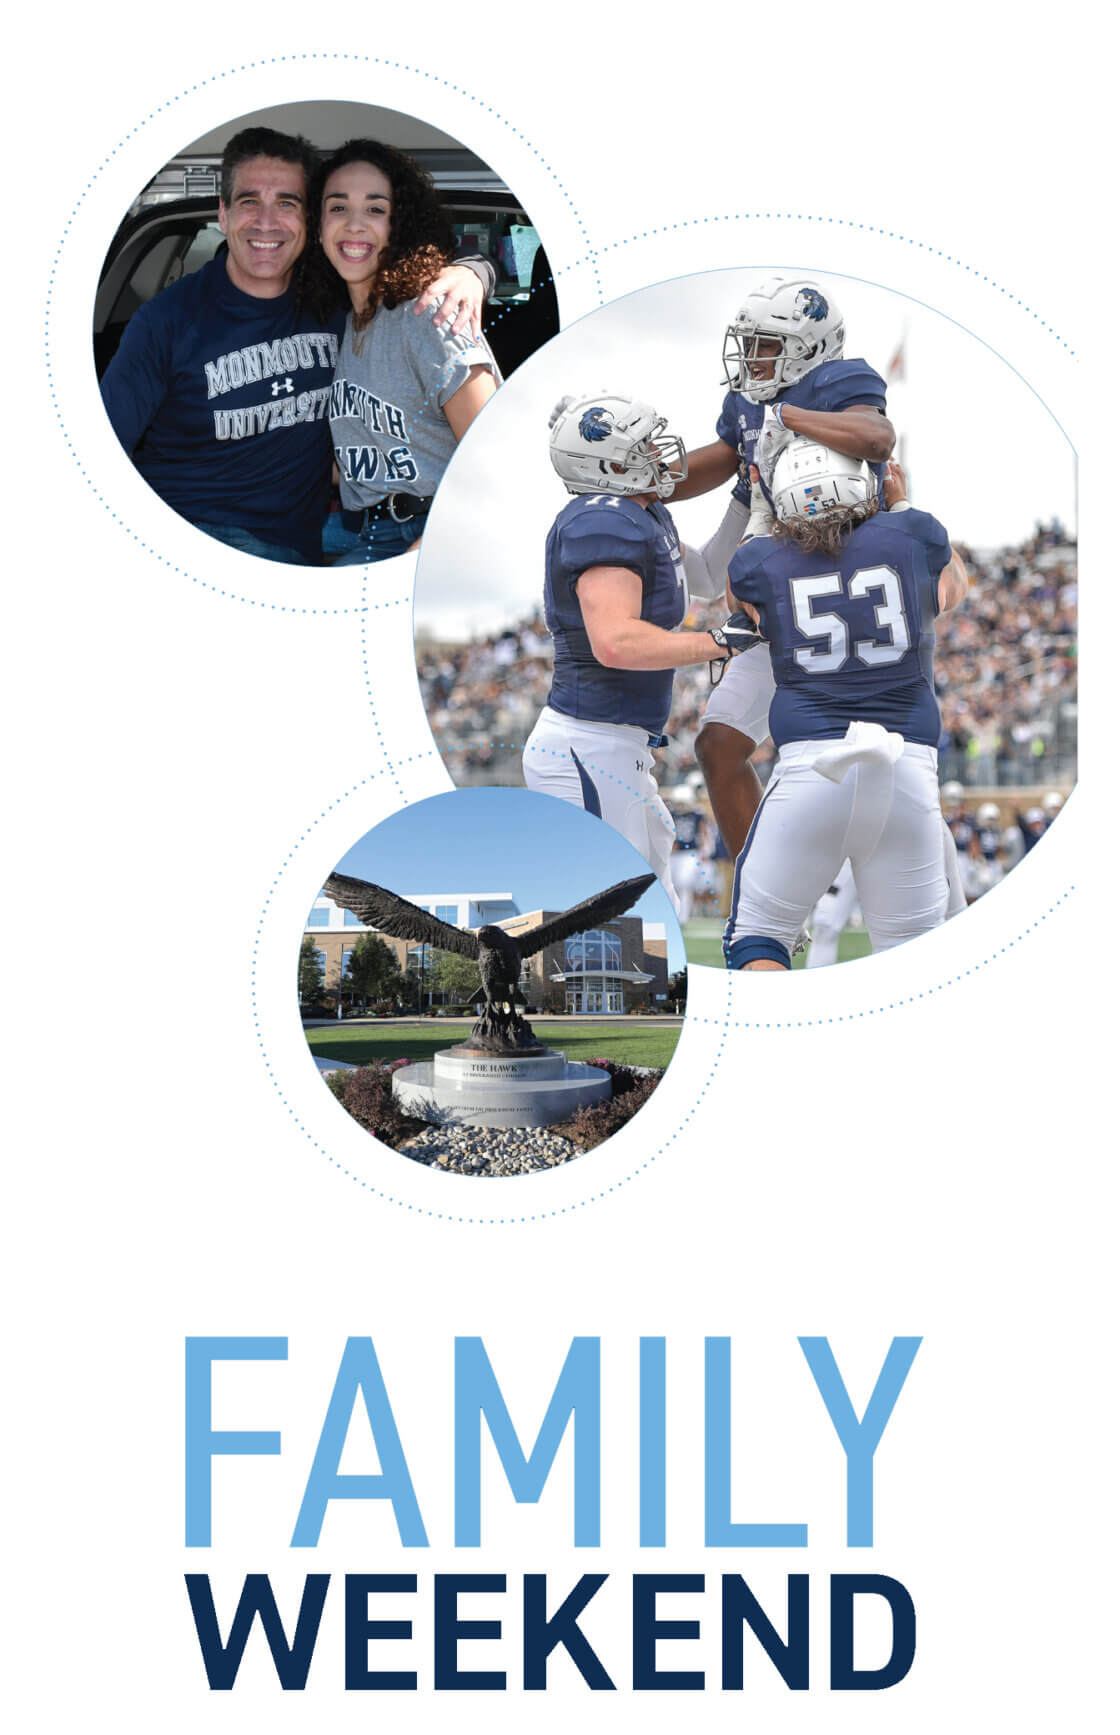 Family Weekend Student Life Monmouth University